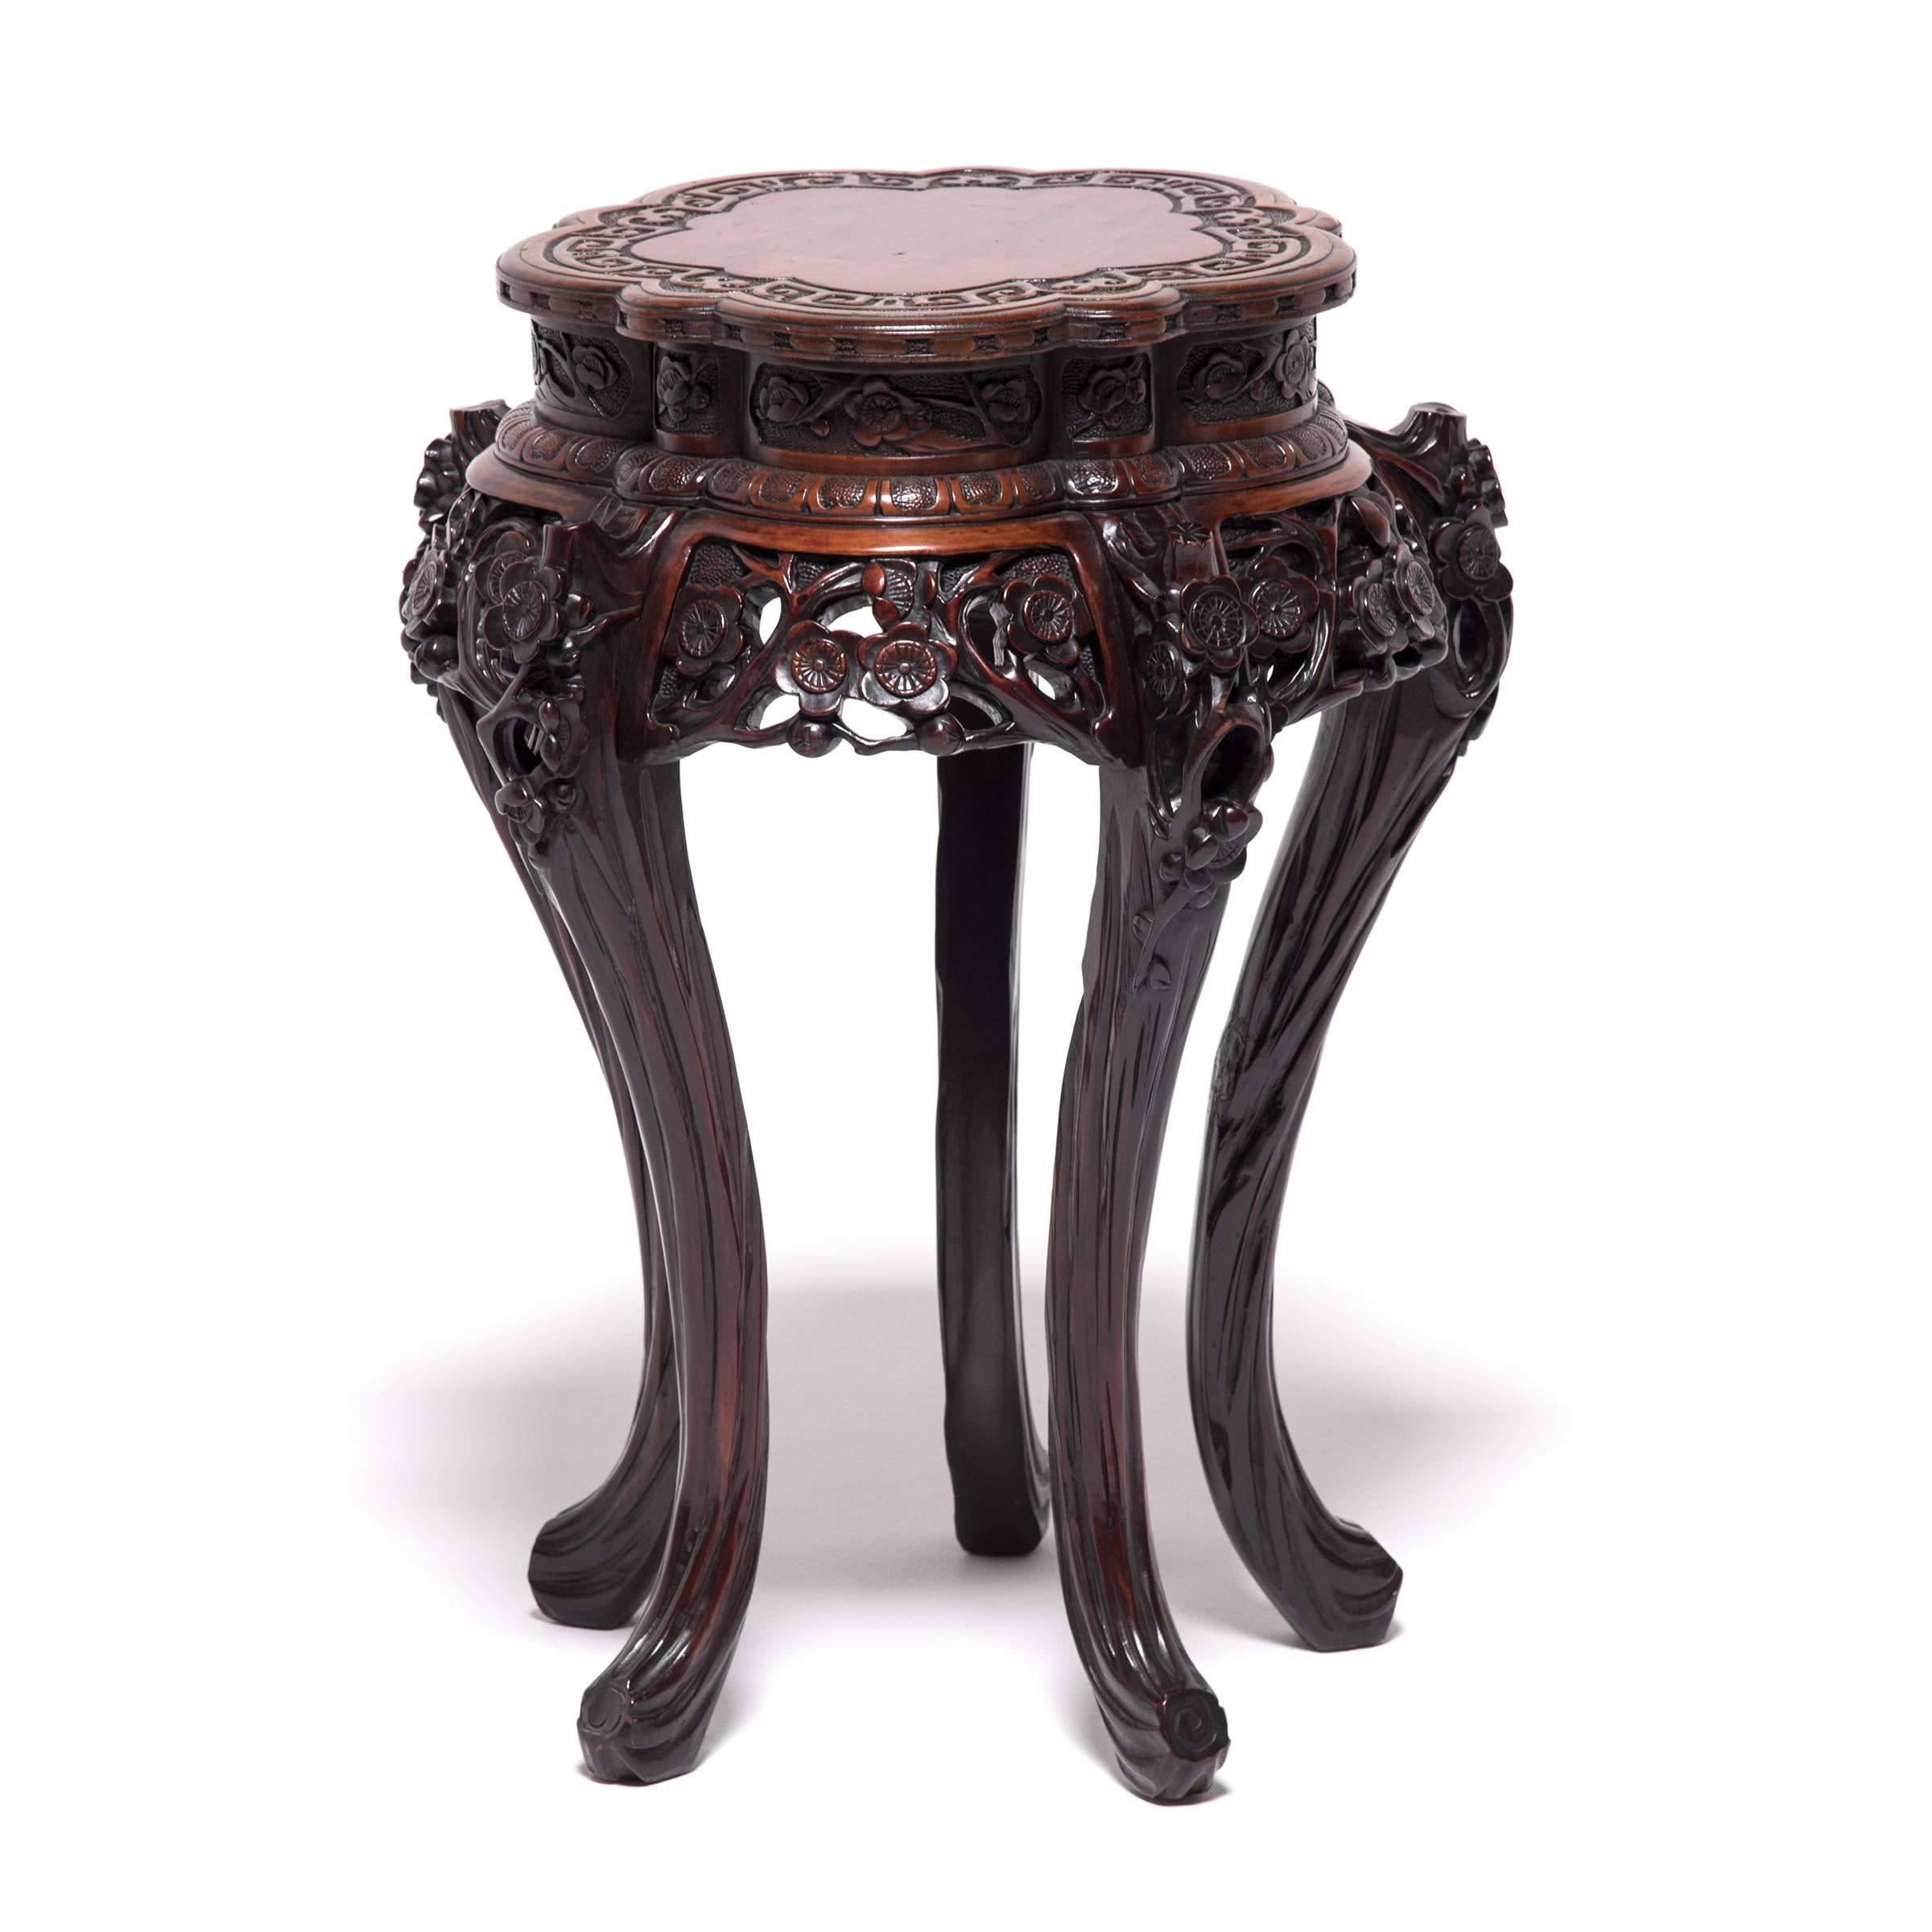 The growth of urban centers and spread of wealth during the Edo period in Japan ushered in an era that reveled in the aesthetic qualities of objects and actions in everyday life. This ornately carved table from the mid-19th century demonstrates the